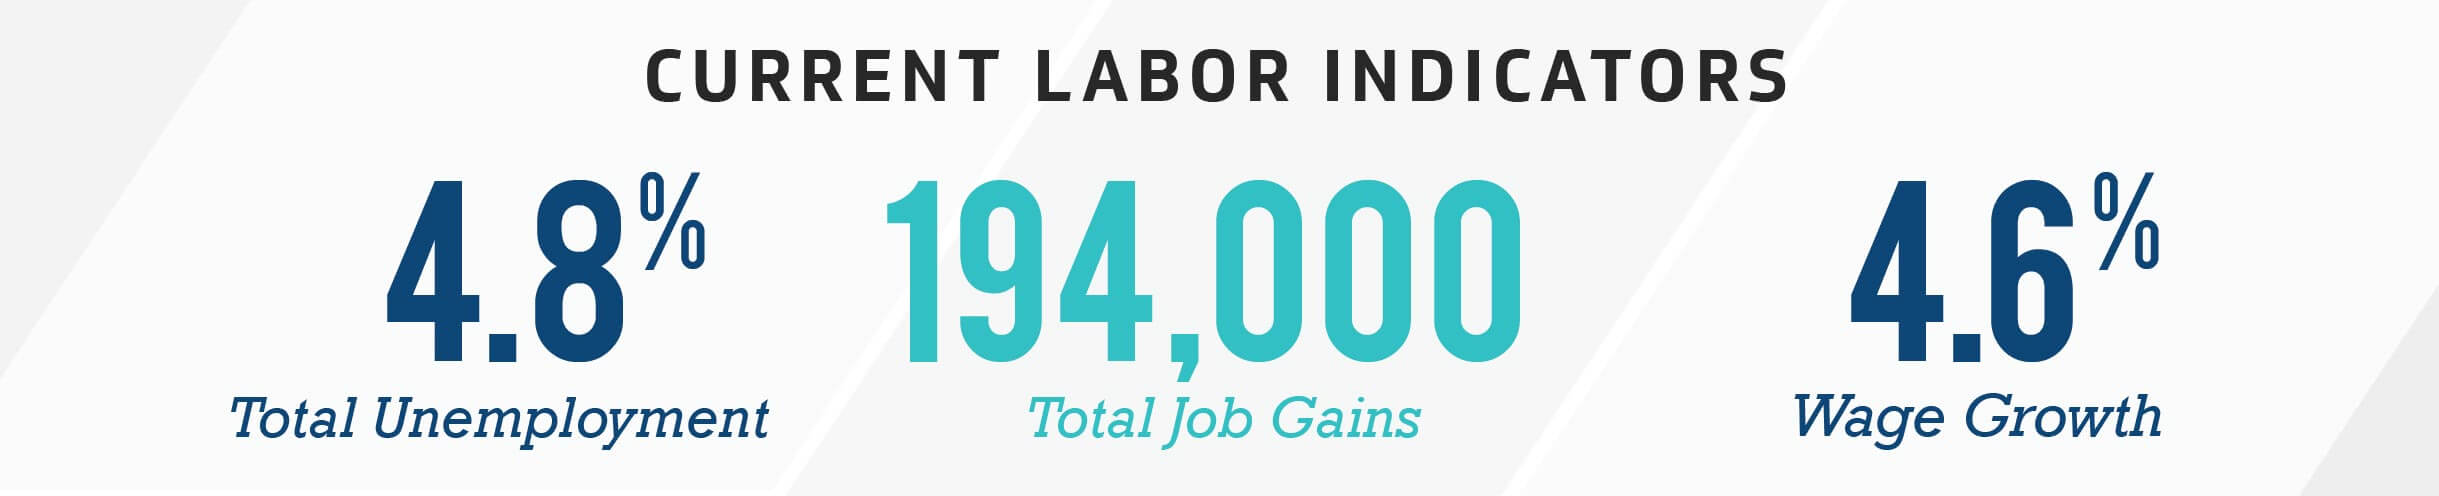 Current Labor Indicators - 4.8% total unemployment - 194,000 total job gains and 4.6% wage growth